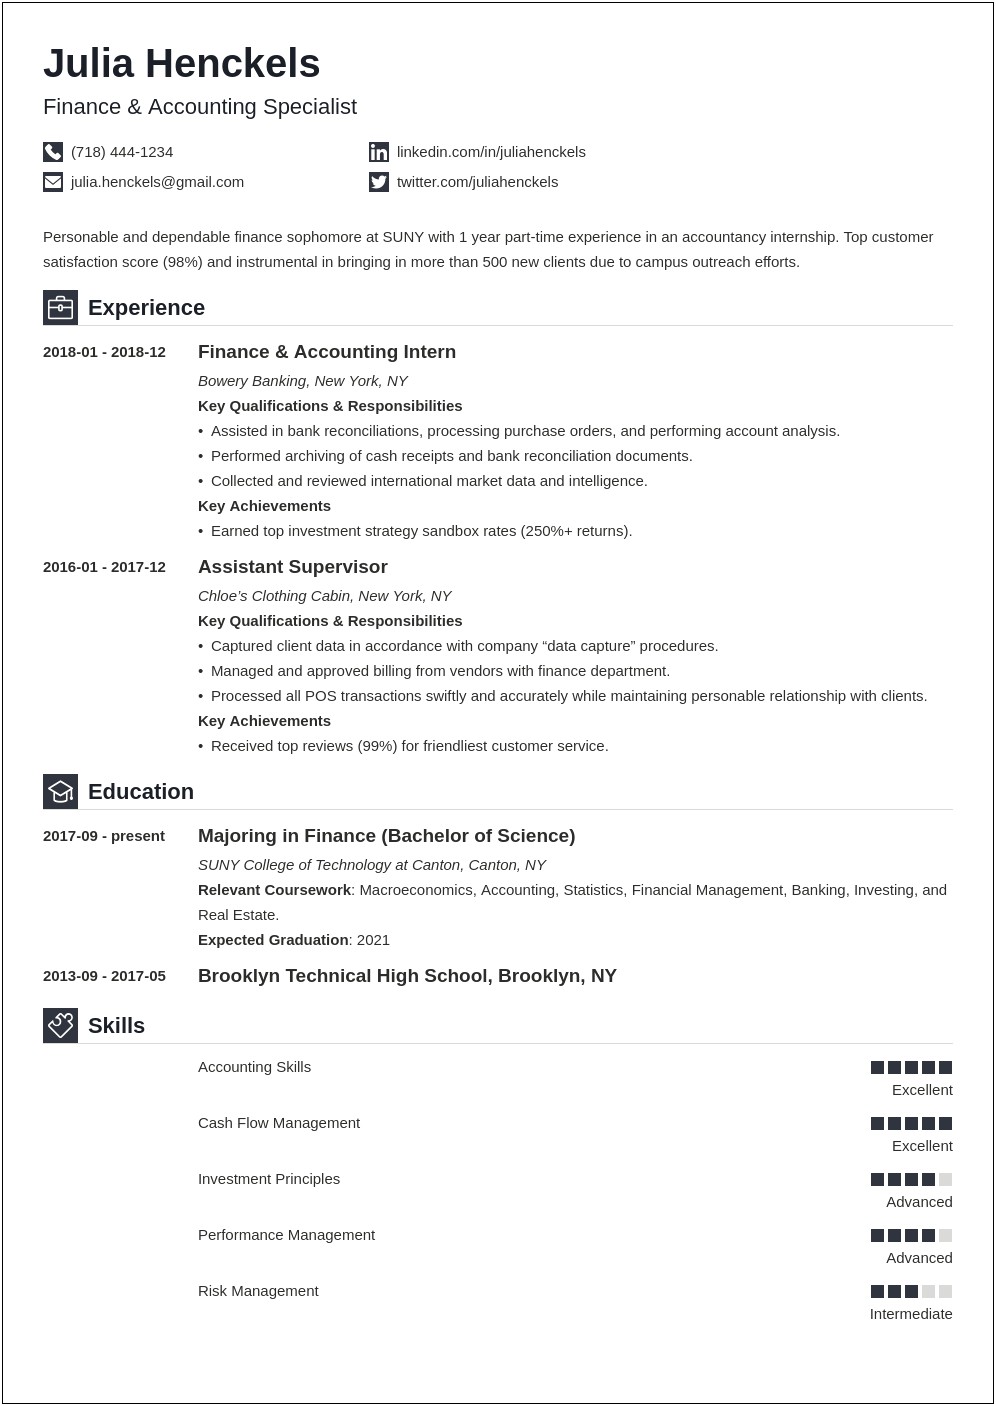 Sample Objectives For A Student Resume